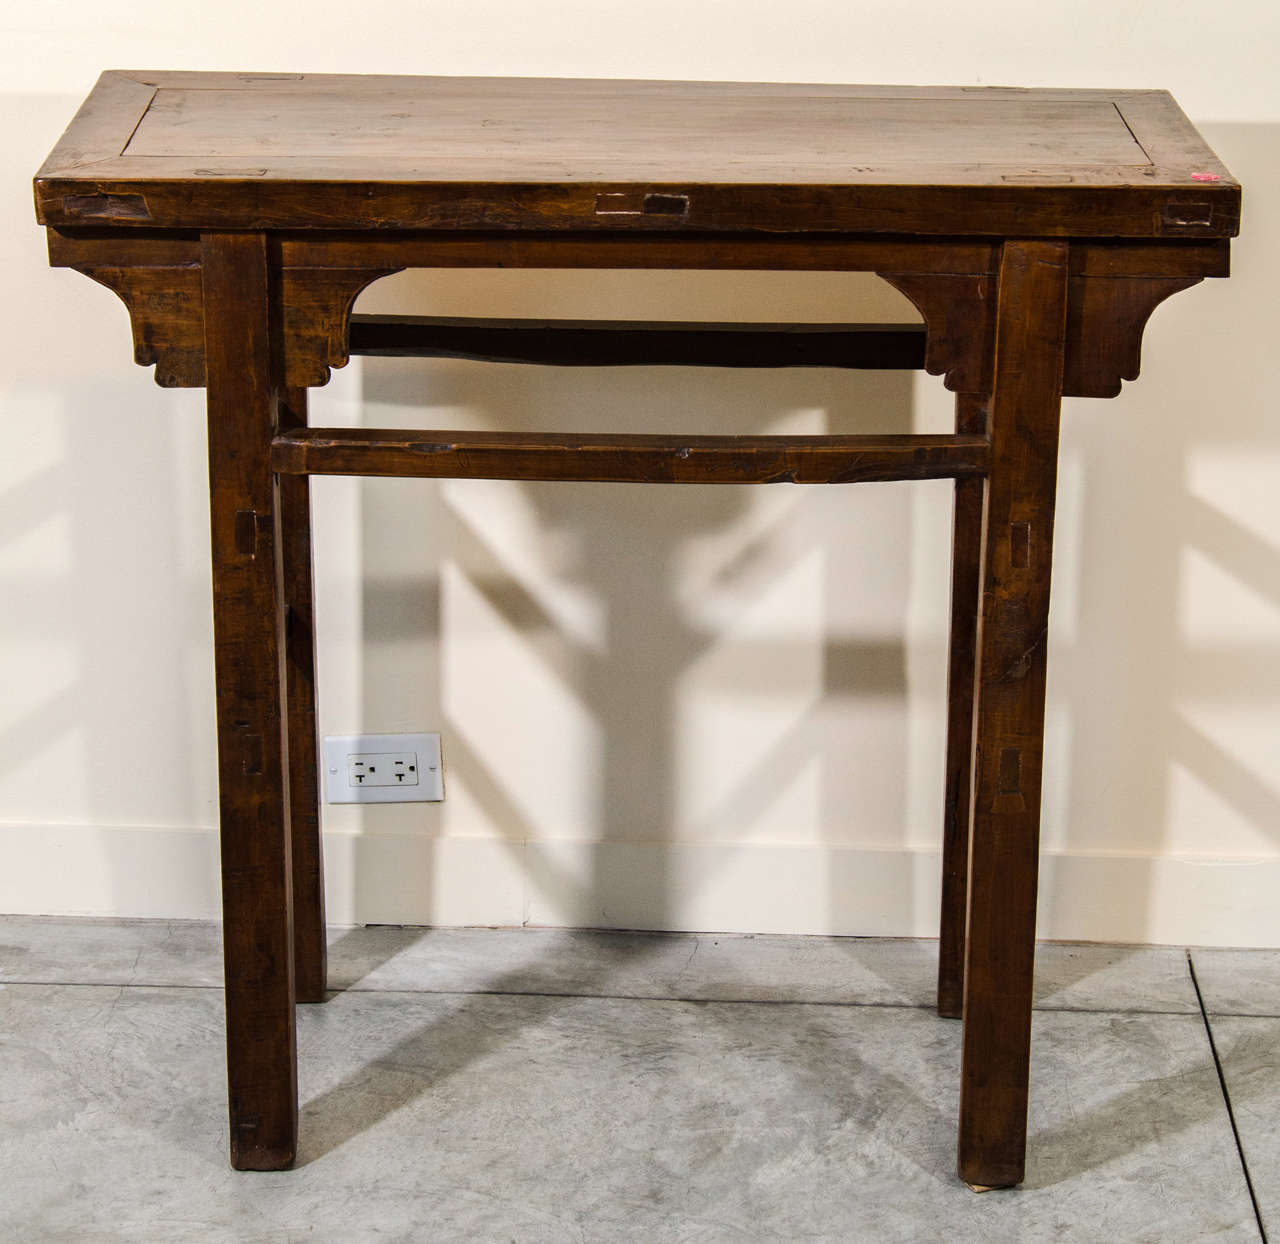 A simple. classic Chinese walnut console. From Xian, c.1900.
T556